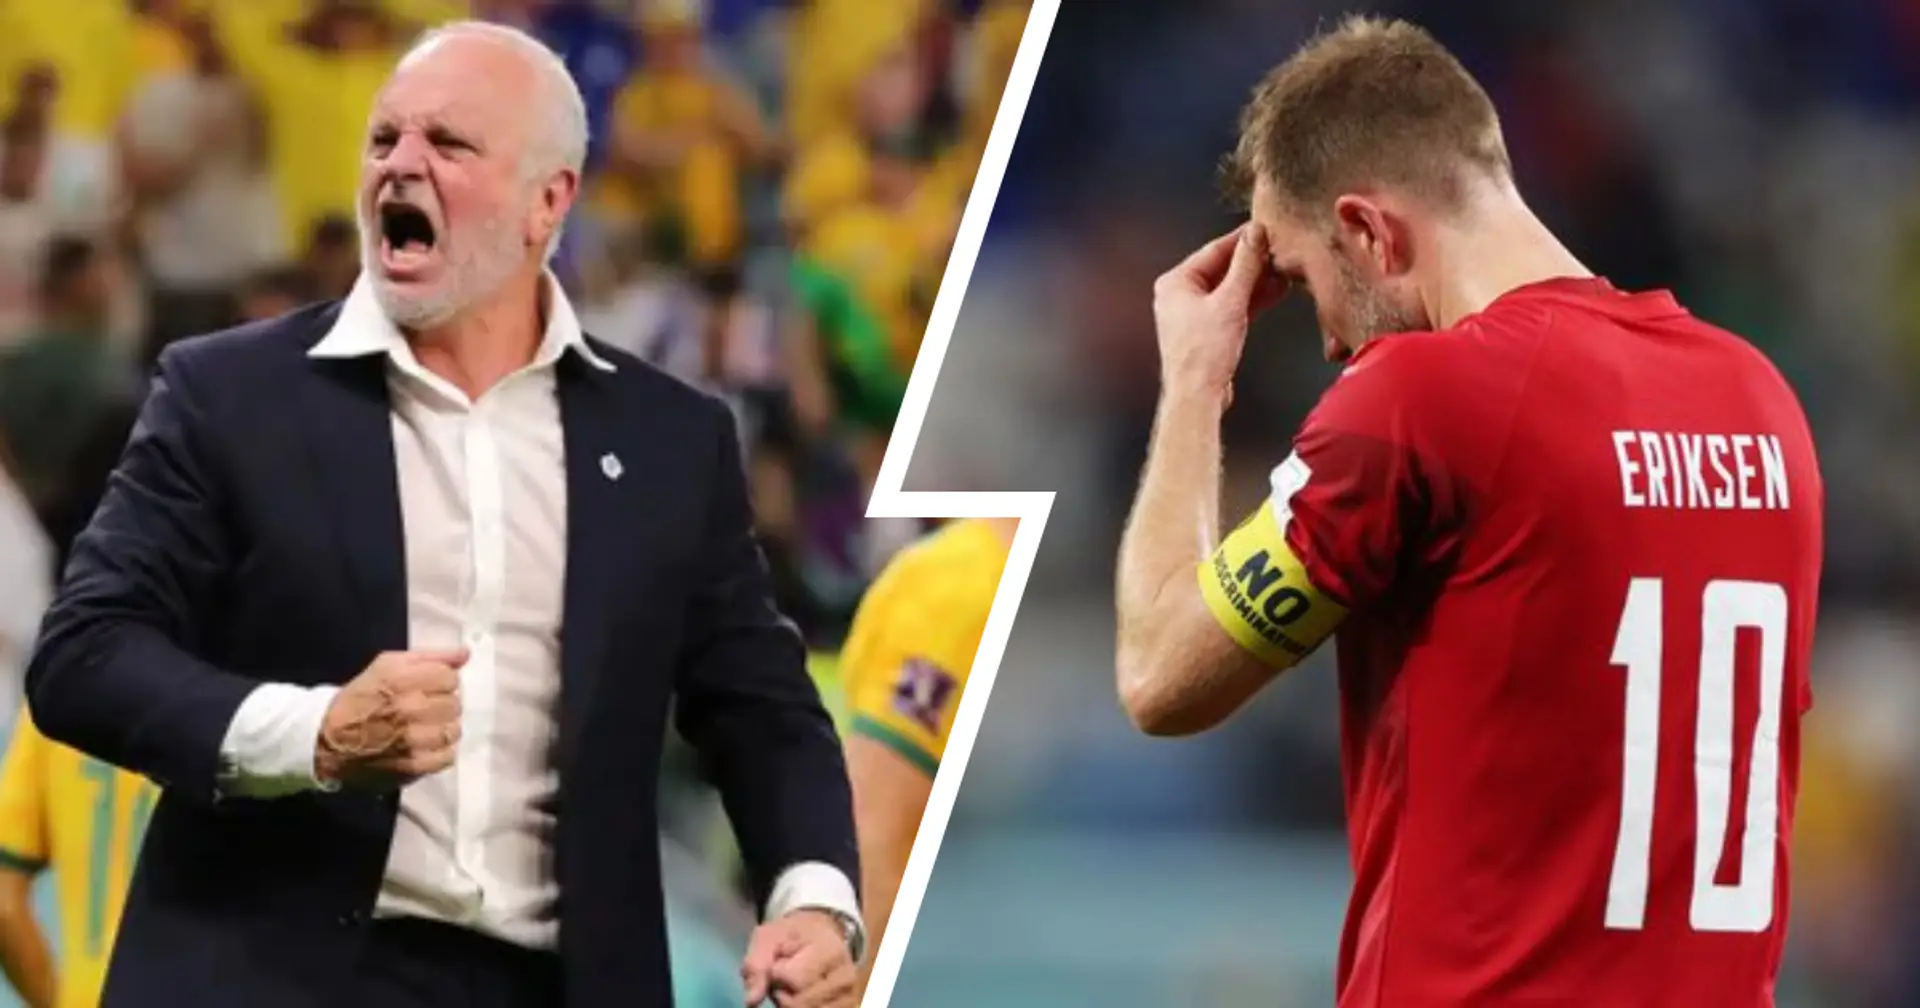 Revealed: Christian Eriksen's classy gesture after World Cup elimination